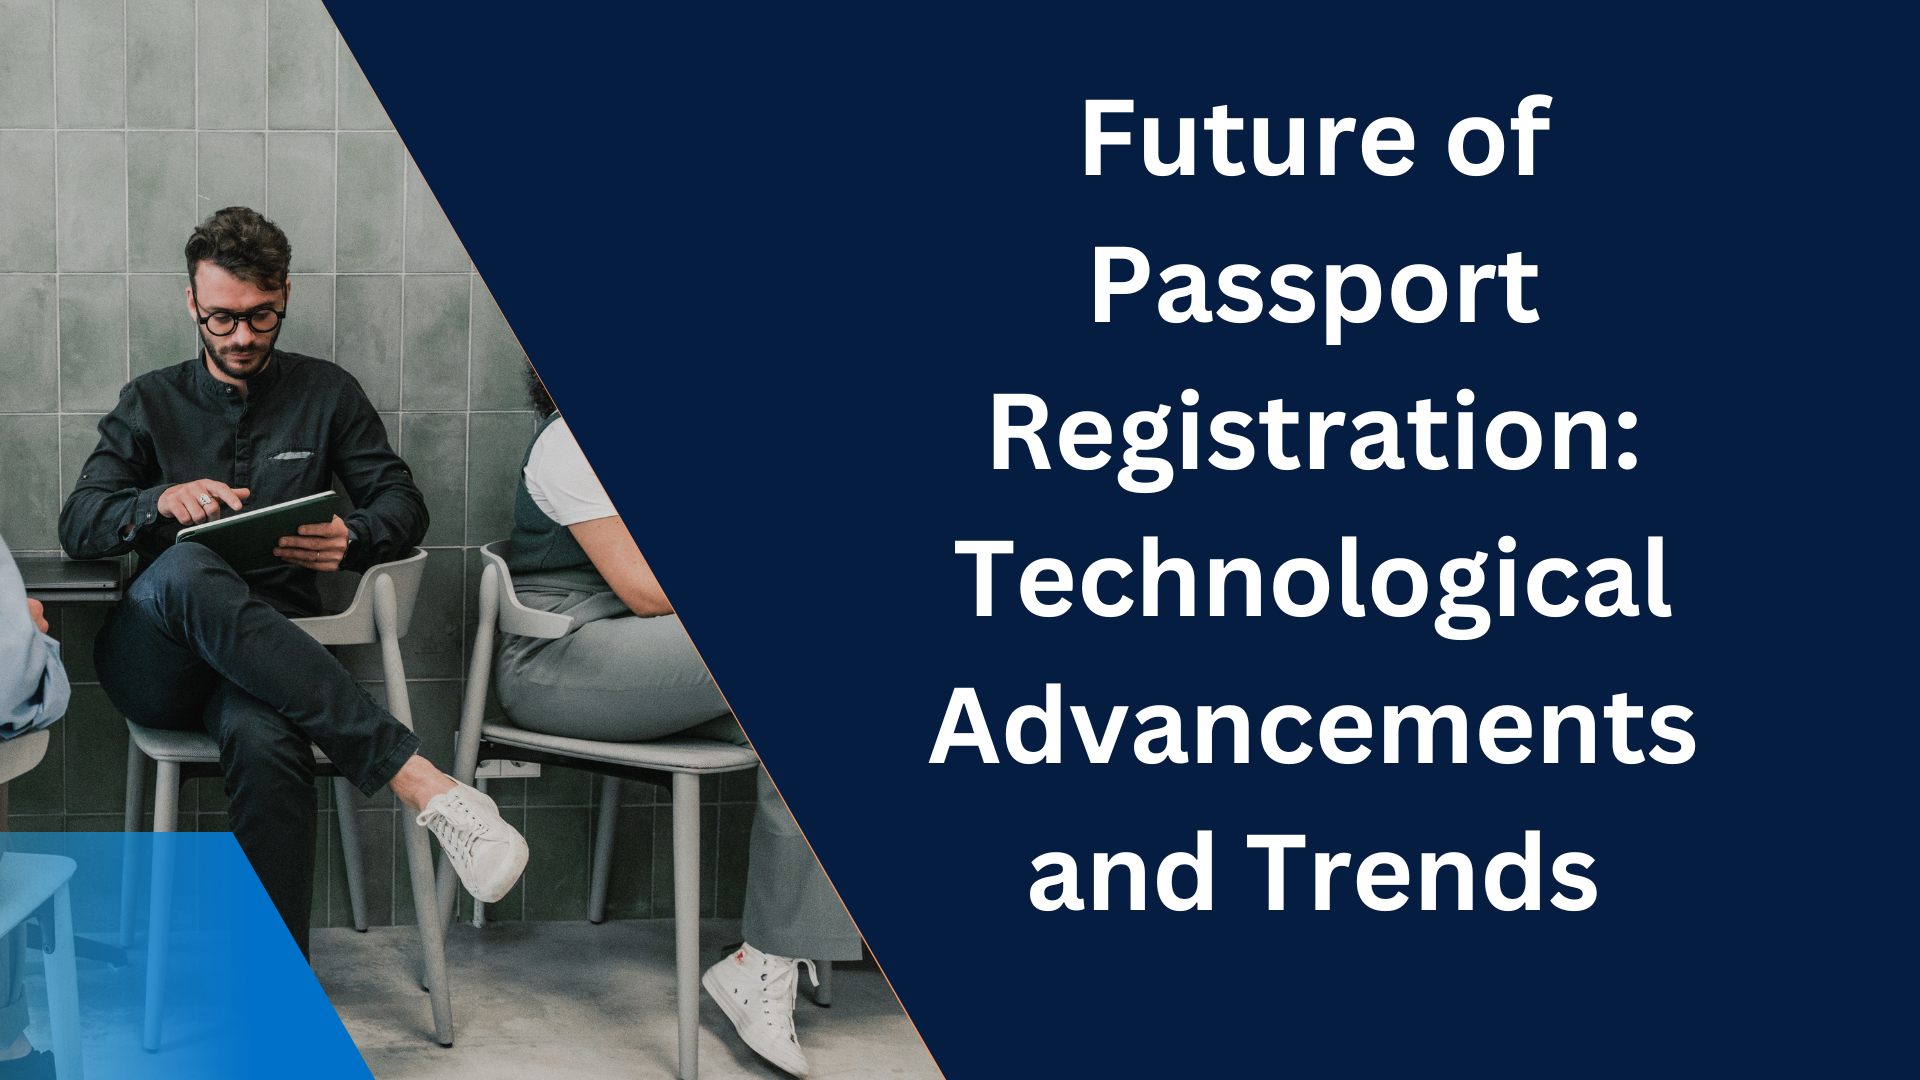 Future of Passport Registration Technological Advancements and Trends